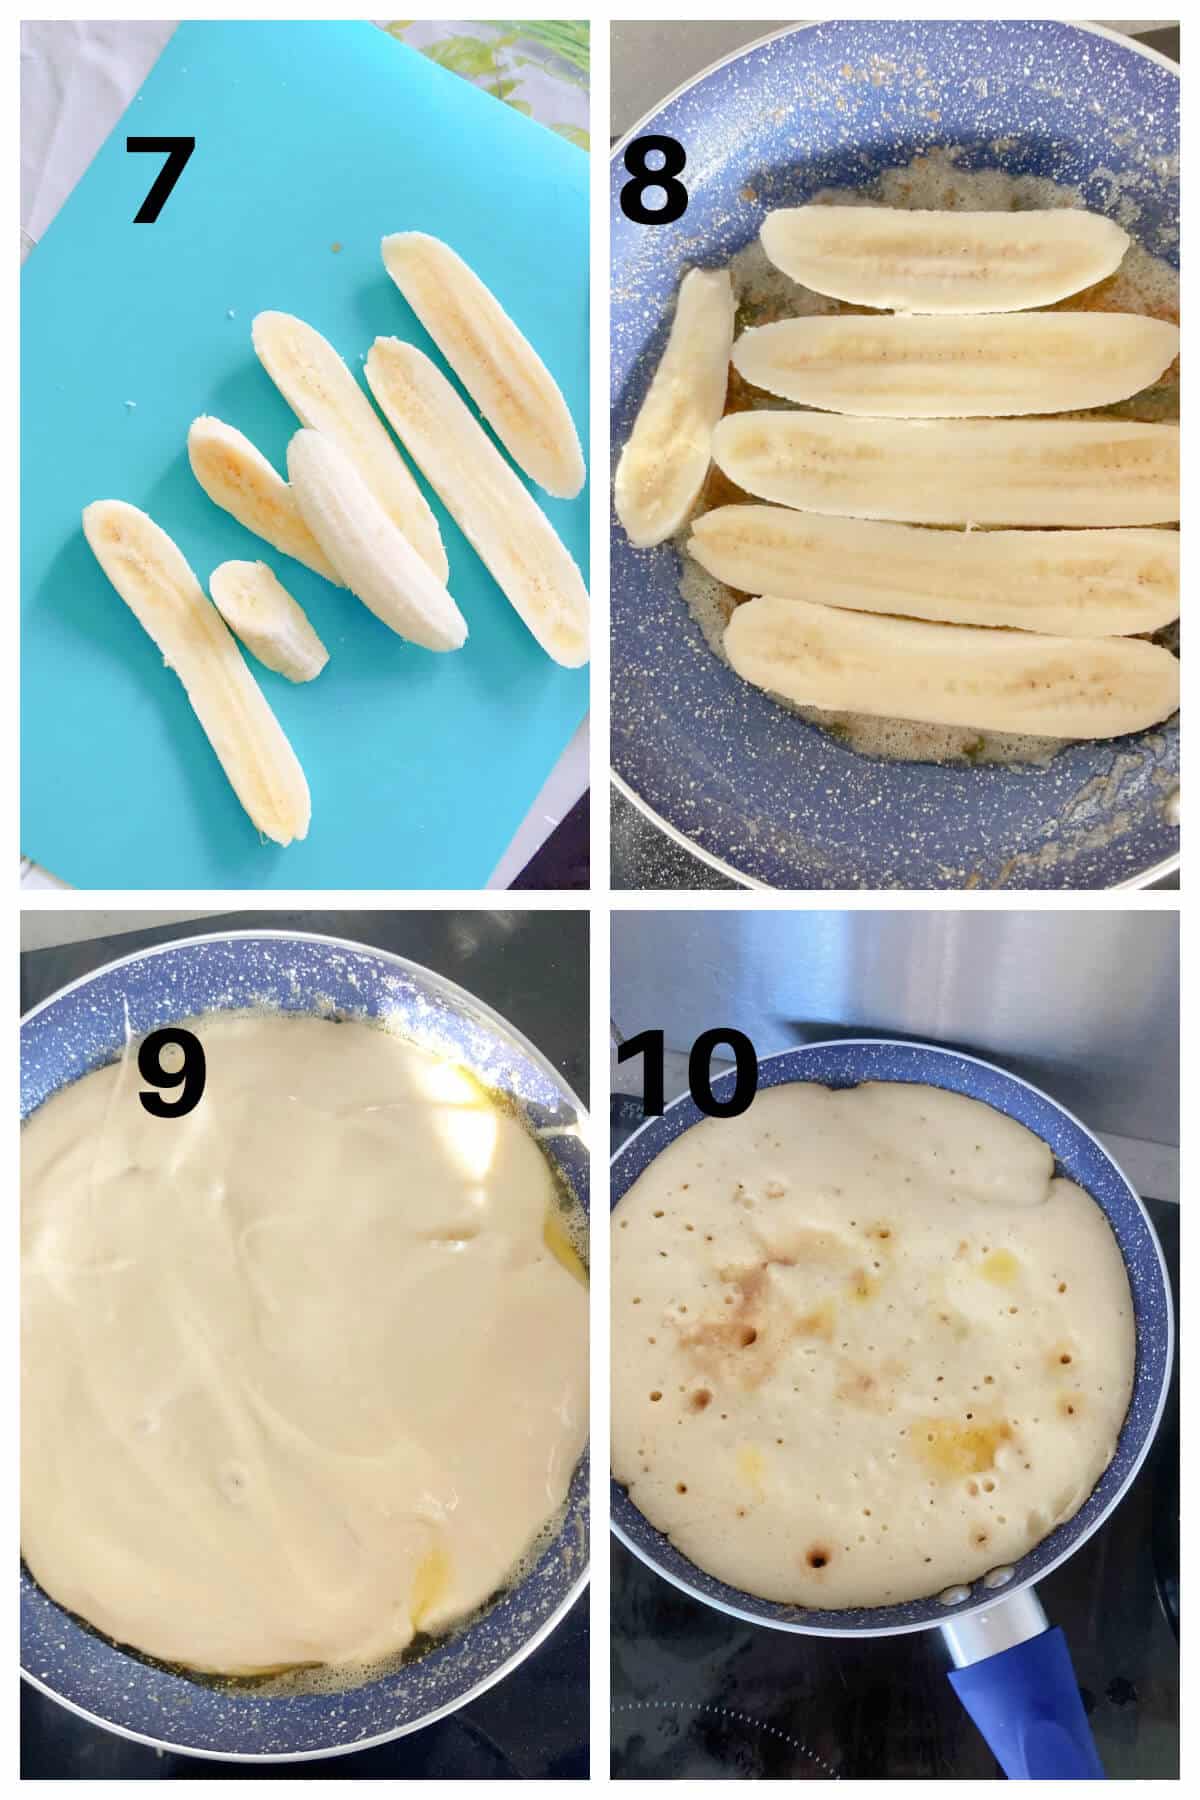 Collage of 4 photos to show how to make cake in a pan.